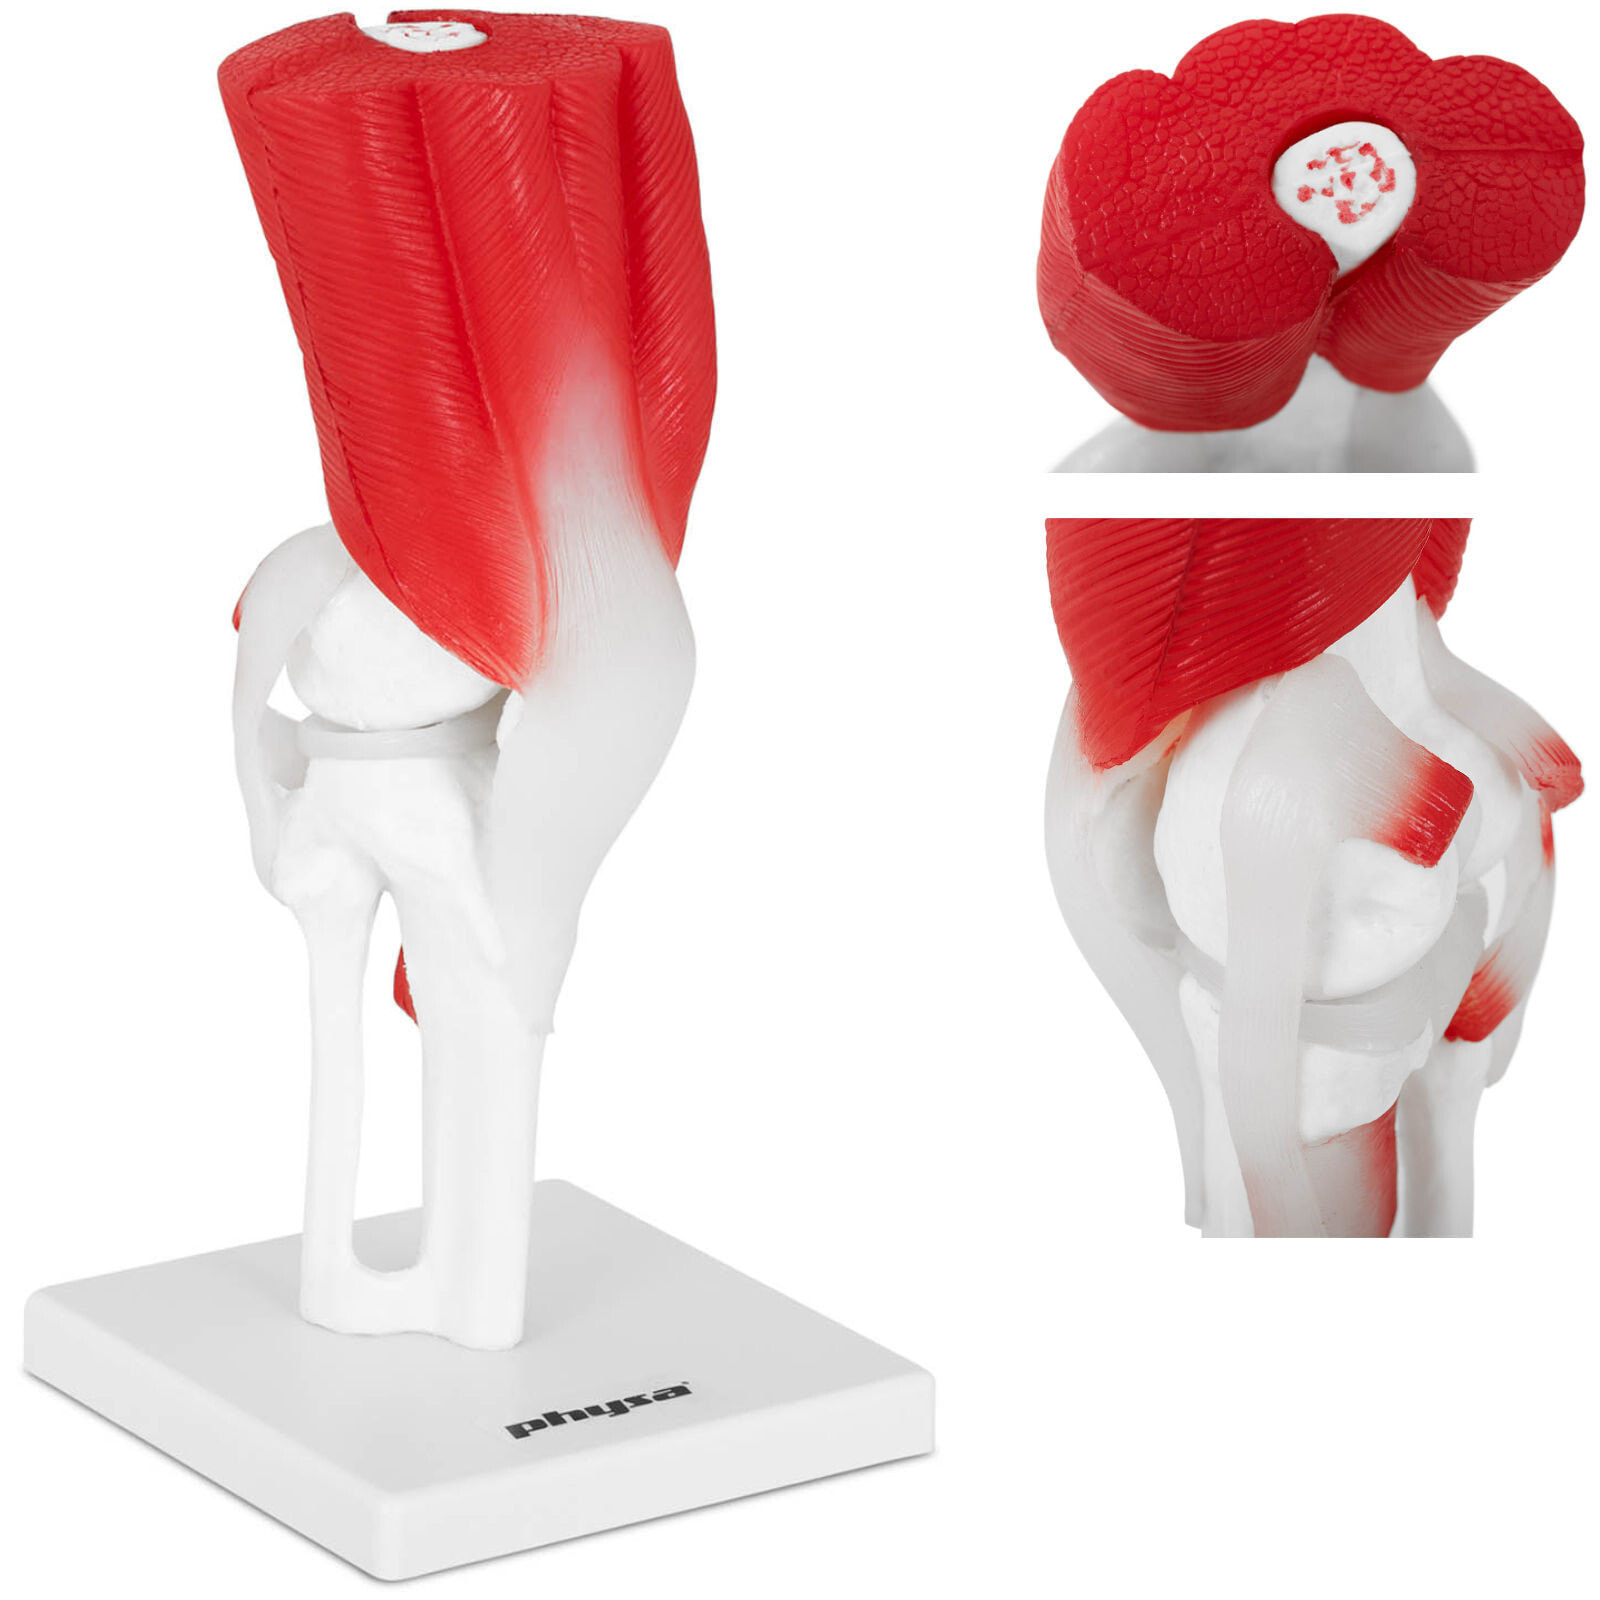 3D anatomical model of the knee in 1: 1 scale